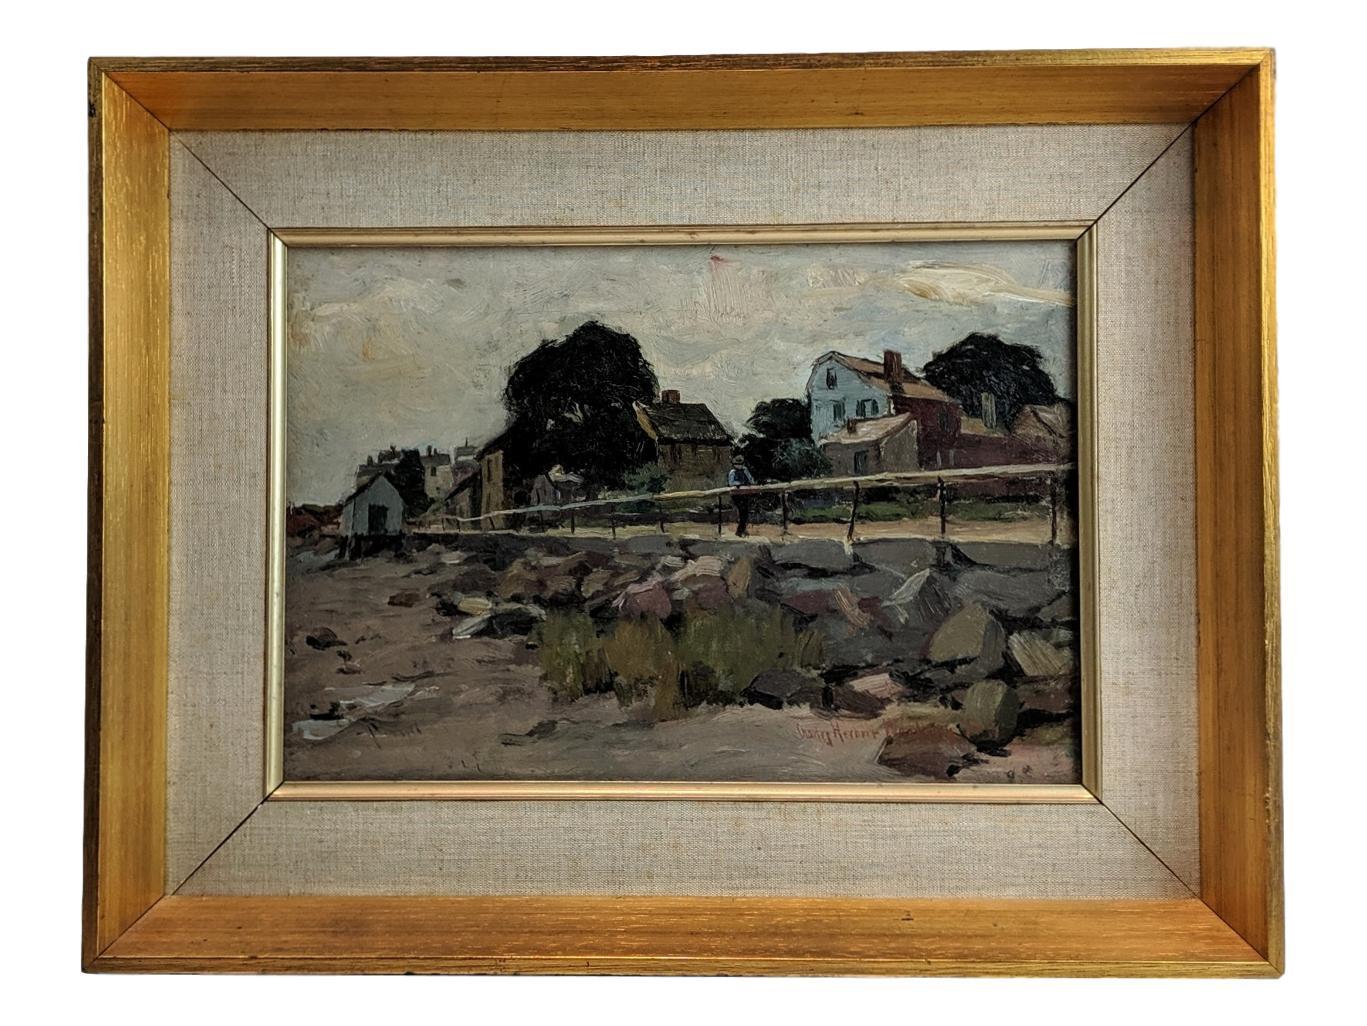 Oil on canvas
Road by the Cost, Ogunquit Maine
Signed lower left “Charles Herbert Wodbury”
Canvas size: 9” x 13 1/8” Framed size: 13 ½” x 17 ½”

Charles H. Woodbury was born in Lynn, Massachusetts, where his earliest work was part of the oeuvre